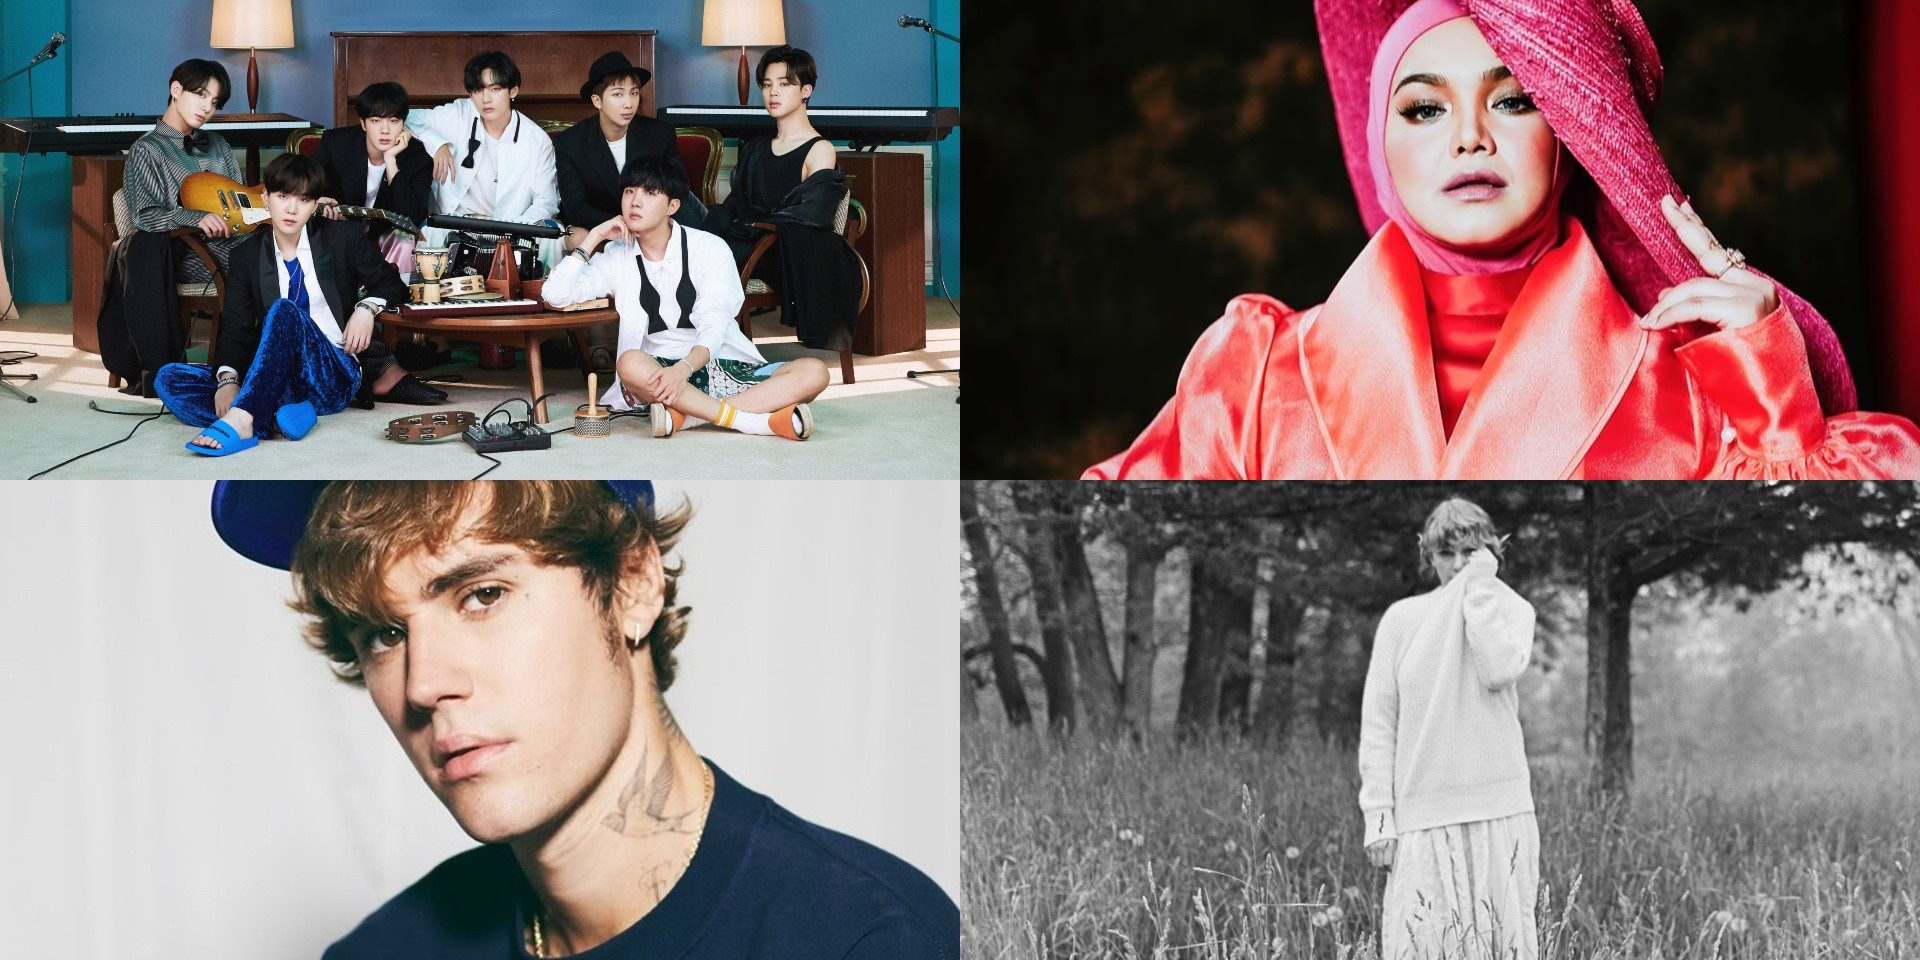 Spotify 2020 Wrapped Malaysia: BTS, Dato' Sri Siti Nurhaliza, Justin Bieber, Taylor Swift, and more emerge as most streamed artists